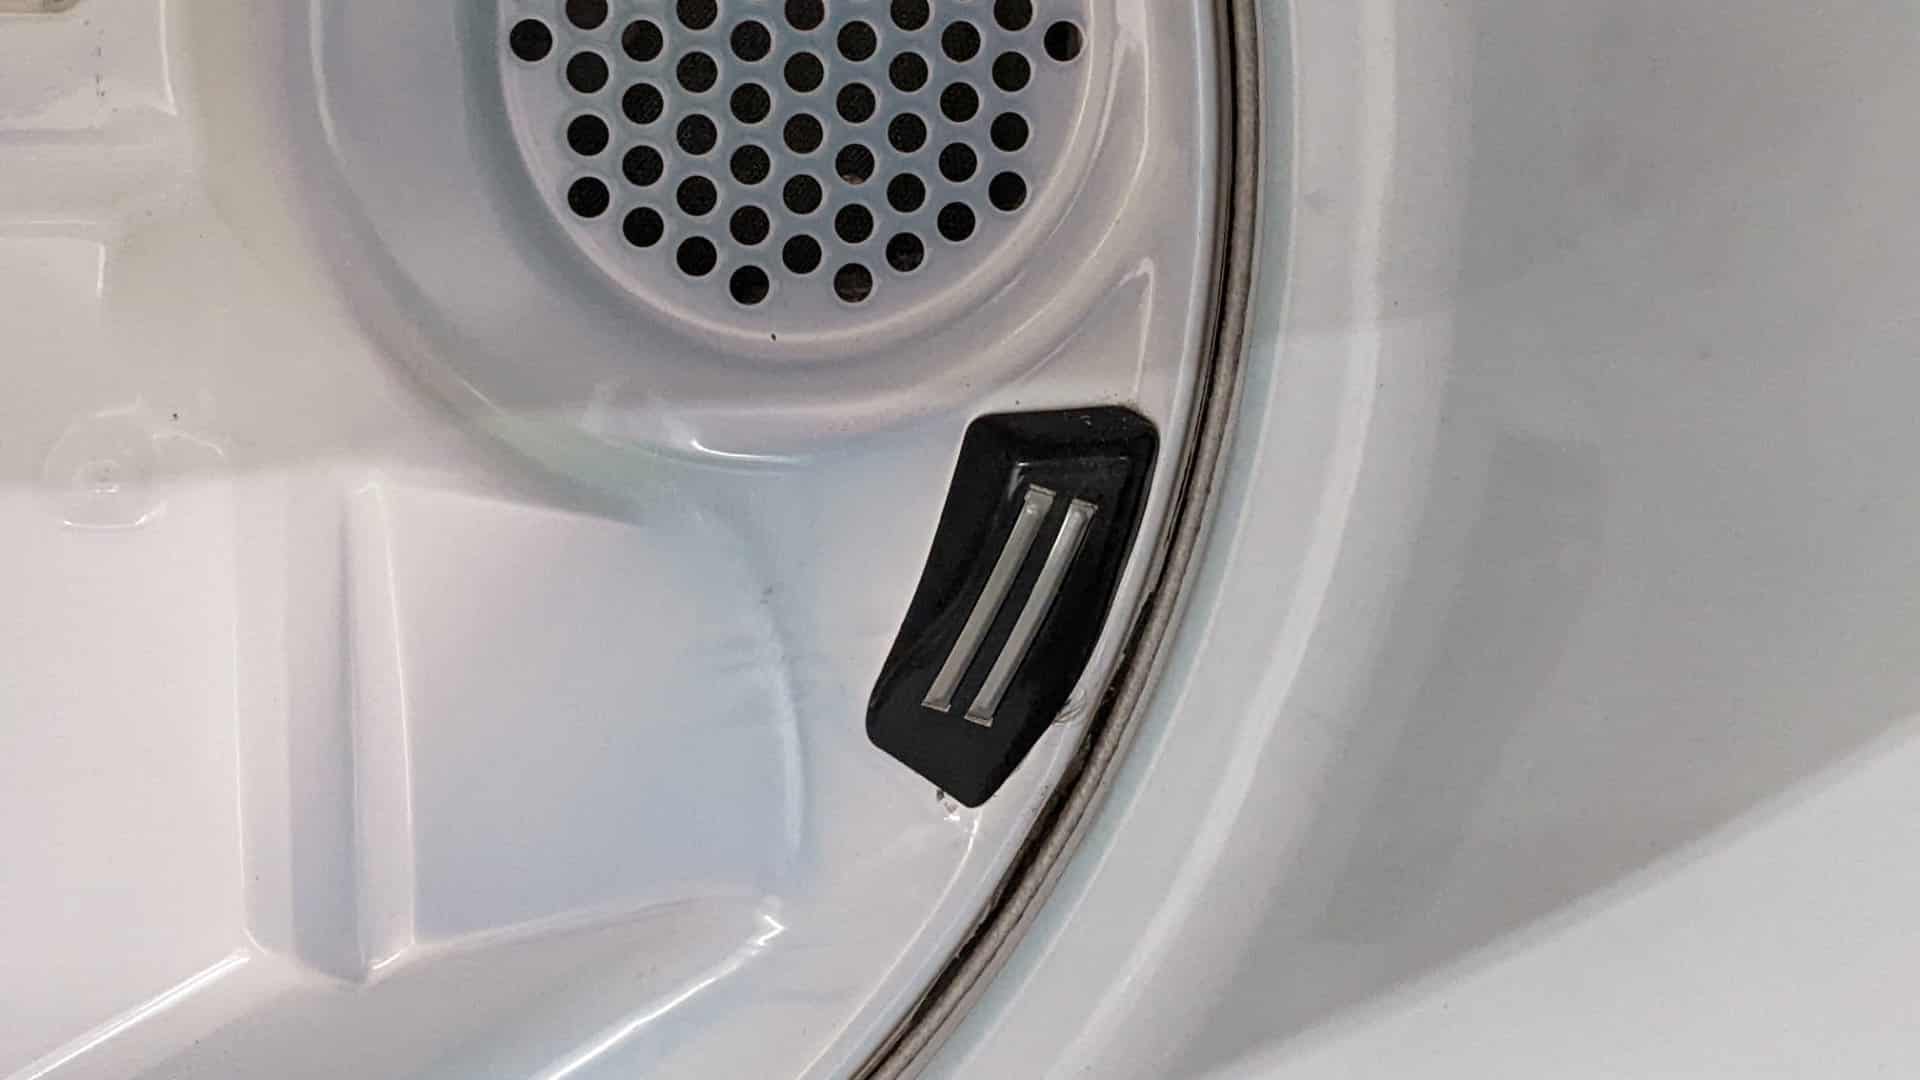 Maytag Neptune Dryer Troubleshooting: Solutions to Common Issues